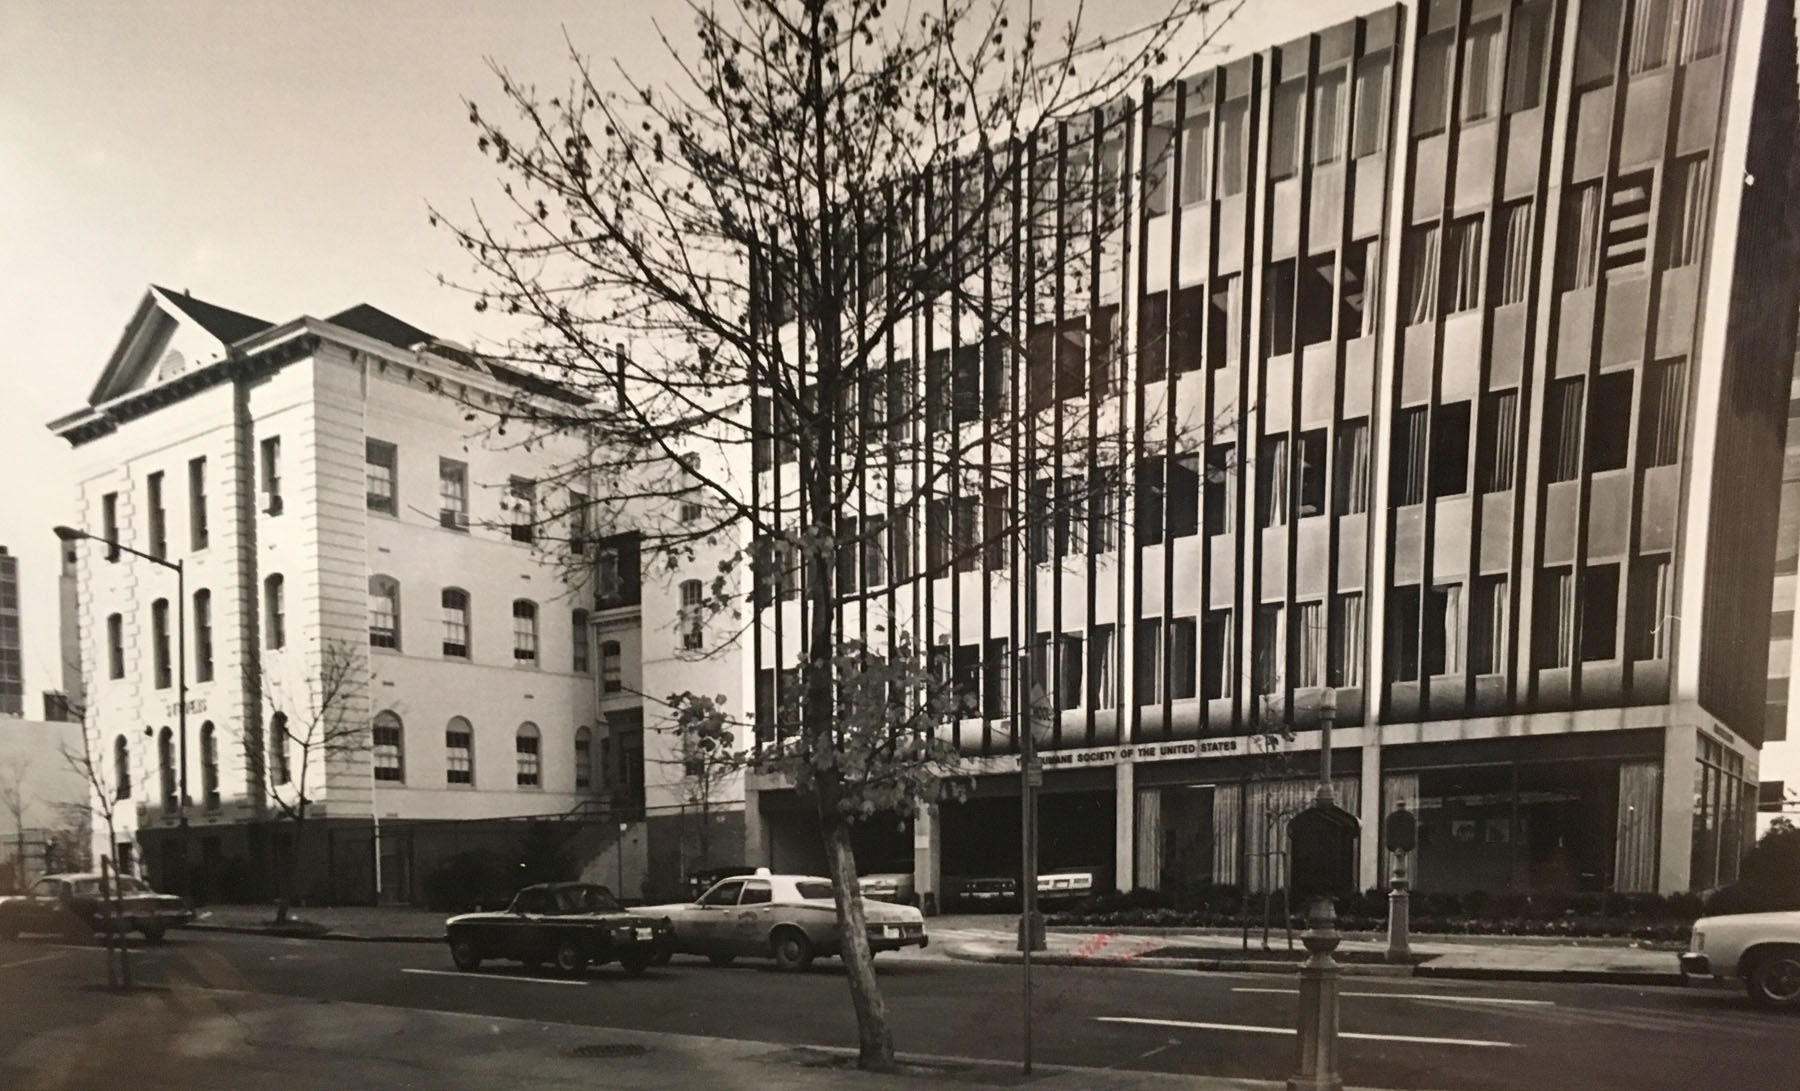 Beginning in the 1960s, modernist concrete and glass office complexes started going, alongisde the narrow three-story 19th century brick building. This 1980 photograph shows the school next to the headquarters of the Washington Human Society, which was built in 1963. (Courtesy Charles Sumner School Musuem and Archives)